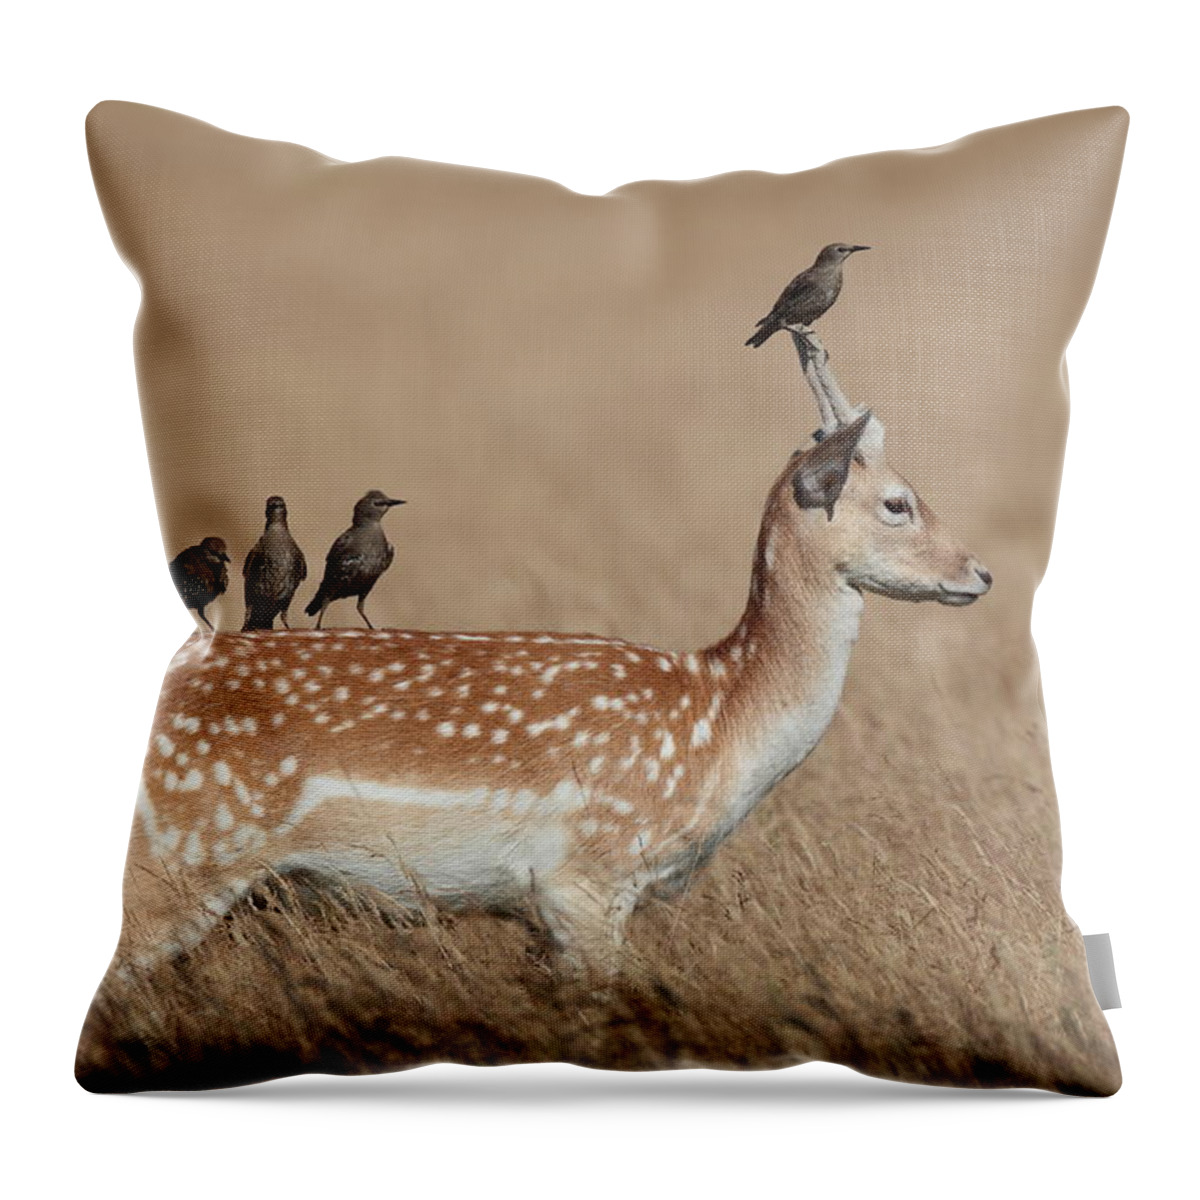 Songbird Throw Pillow featuring the photograph Pricket Picket by Hammerchewer (g C Russell)